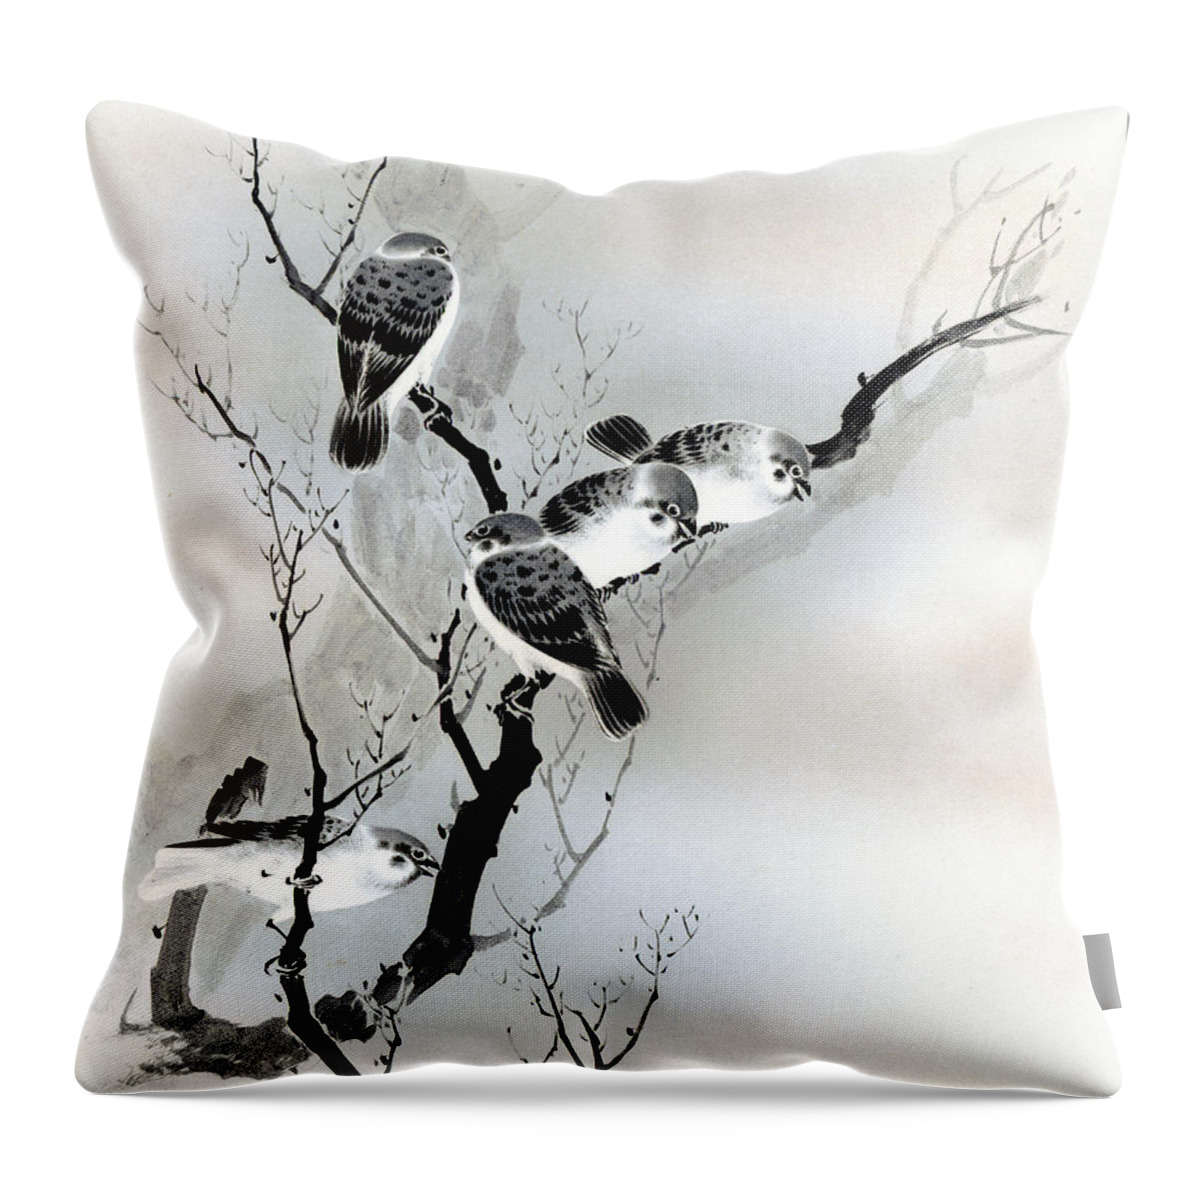 Sparrow Throw Pillow featuring the painting Sparrows by Puri-sen